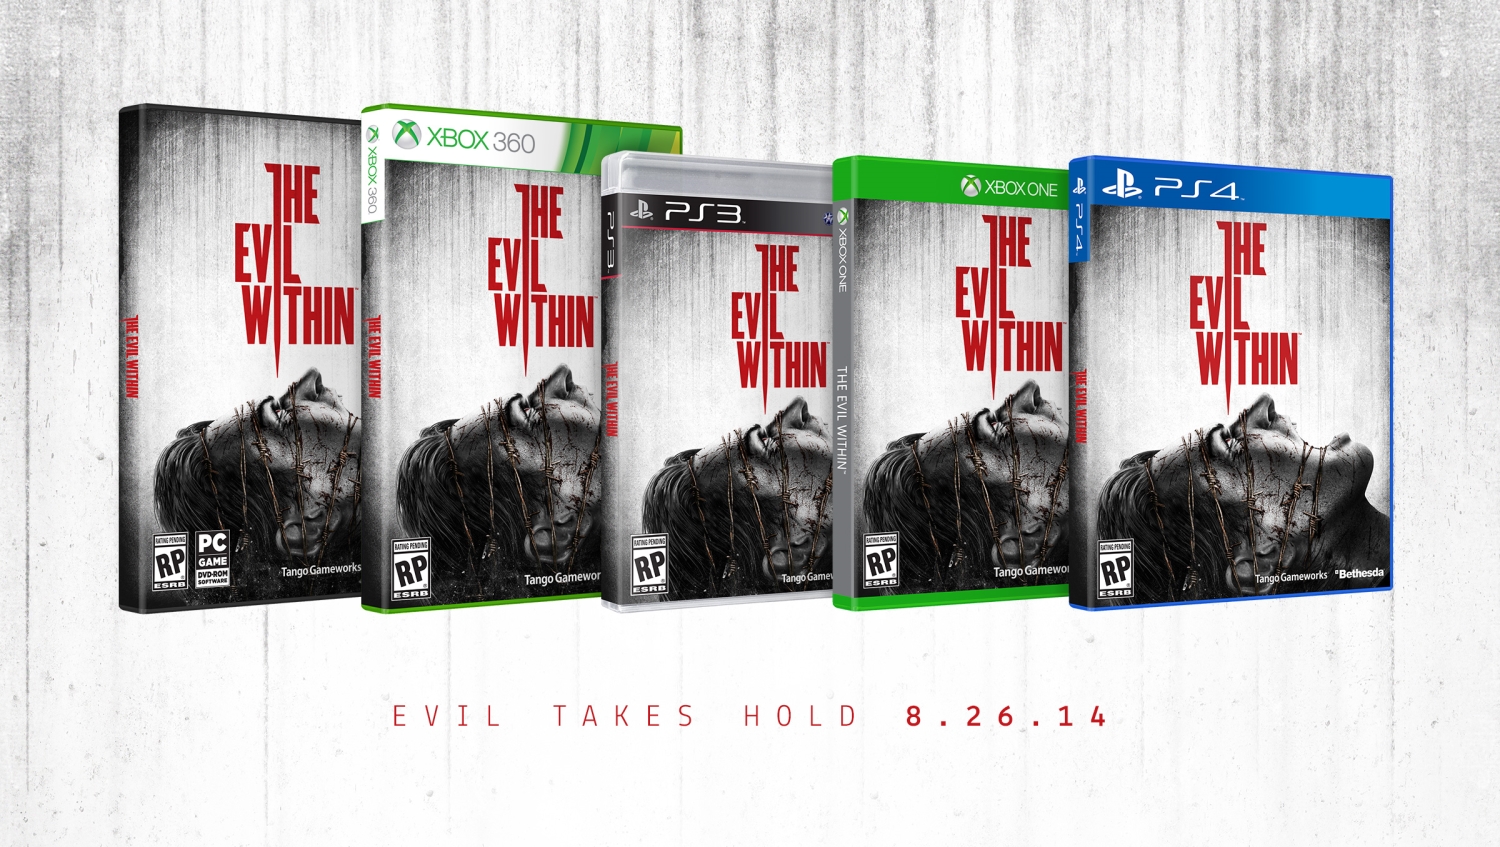 The-evil-within-box-art_1500